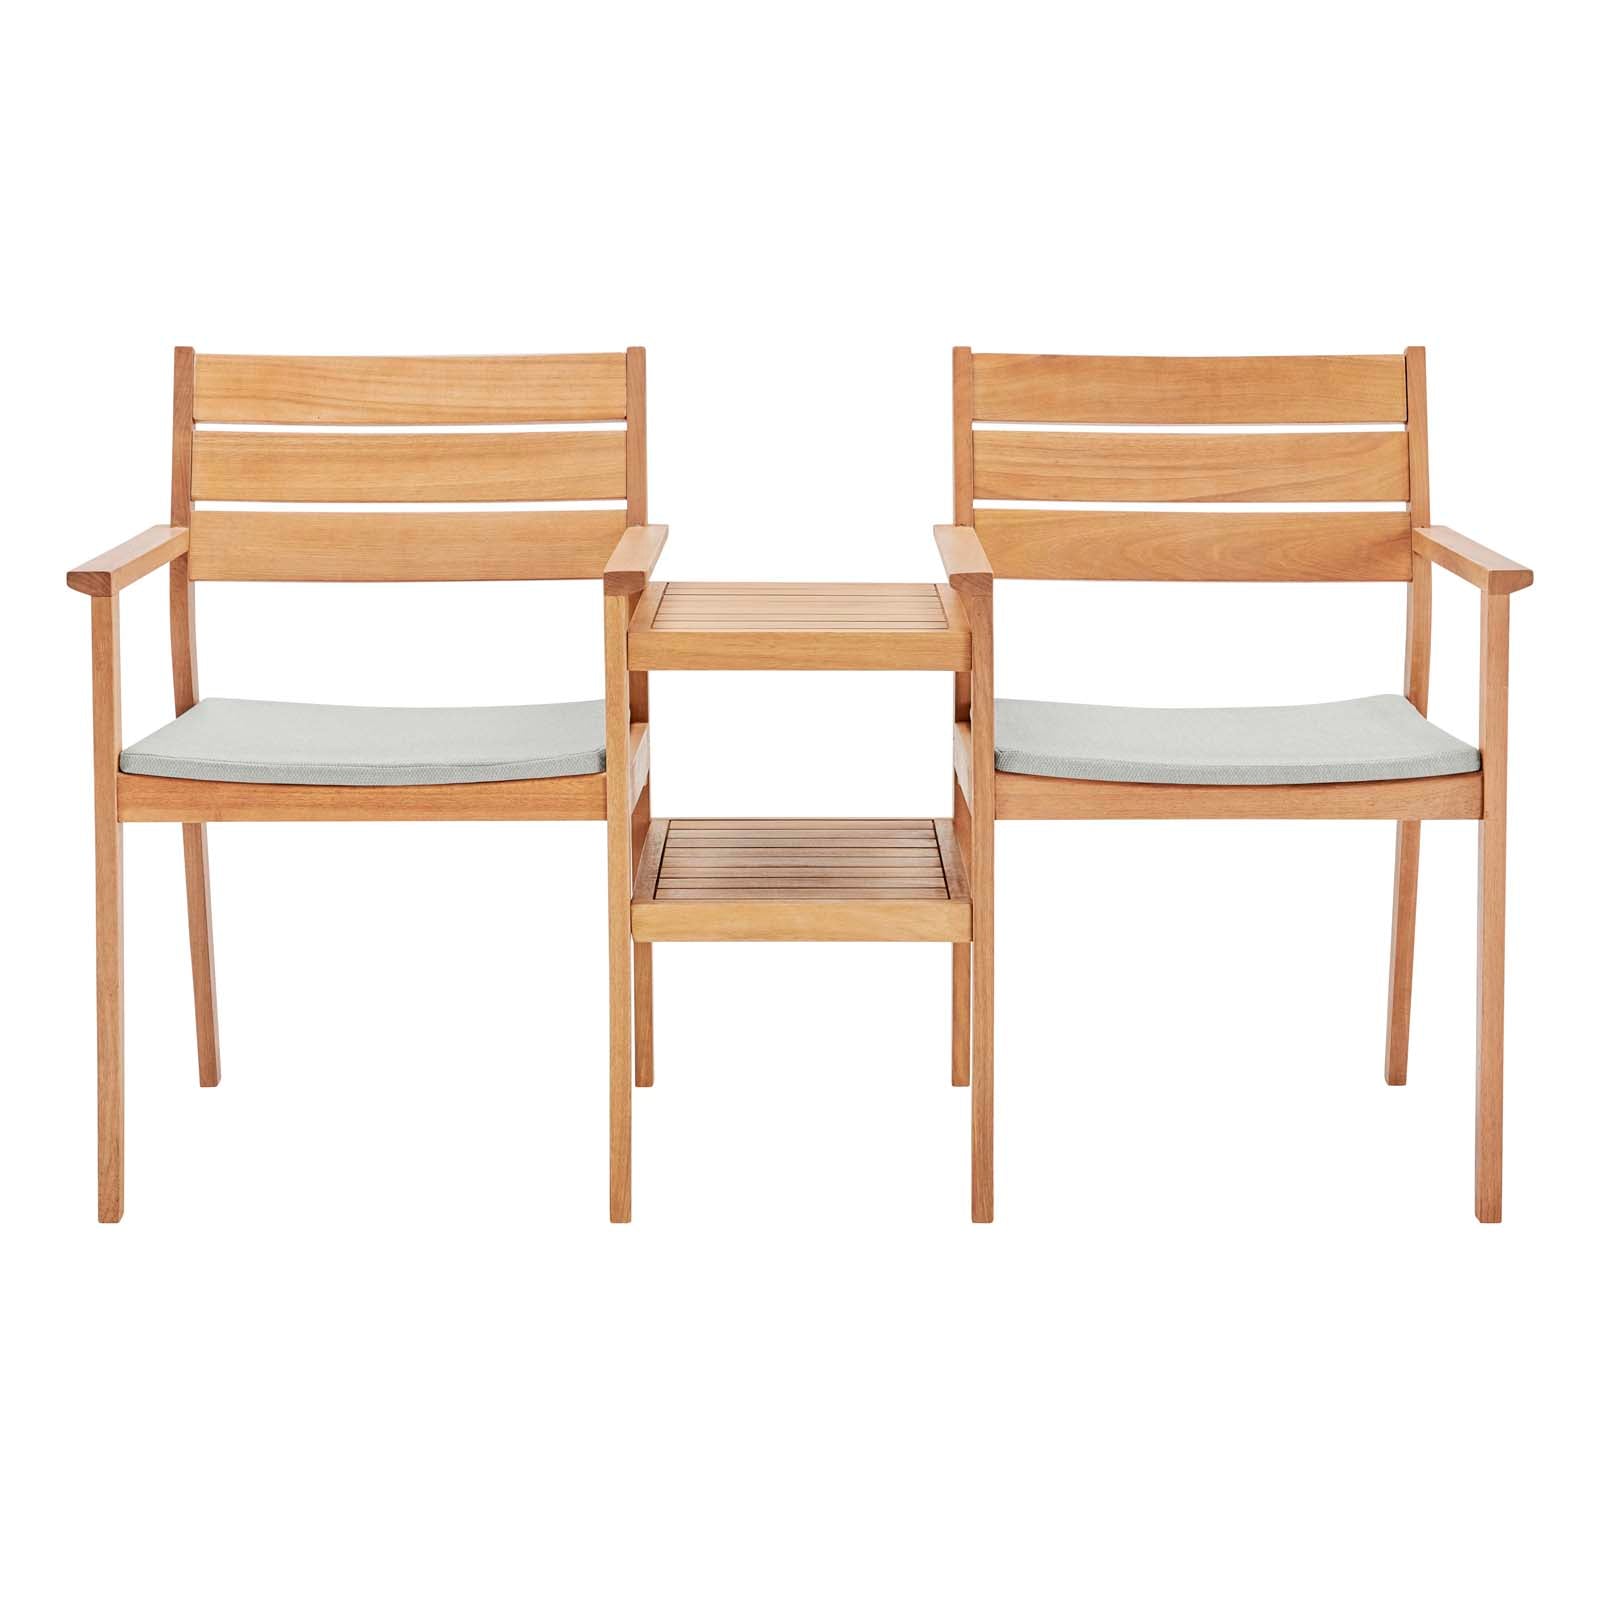 Viewscape Outdoor Patio Ash Wood Jack and Jill Chair Set - East Shore Modern Home Furnishings